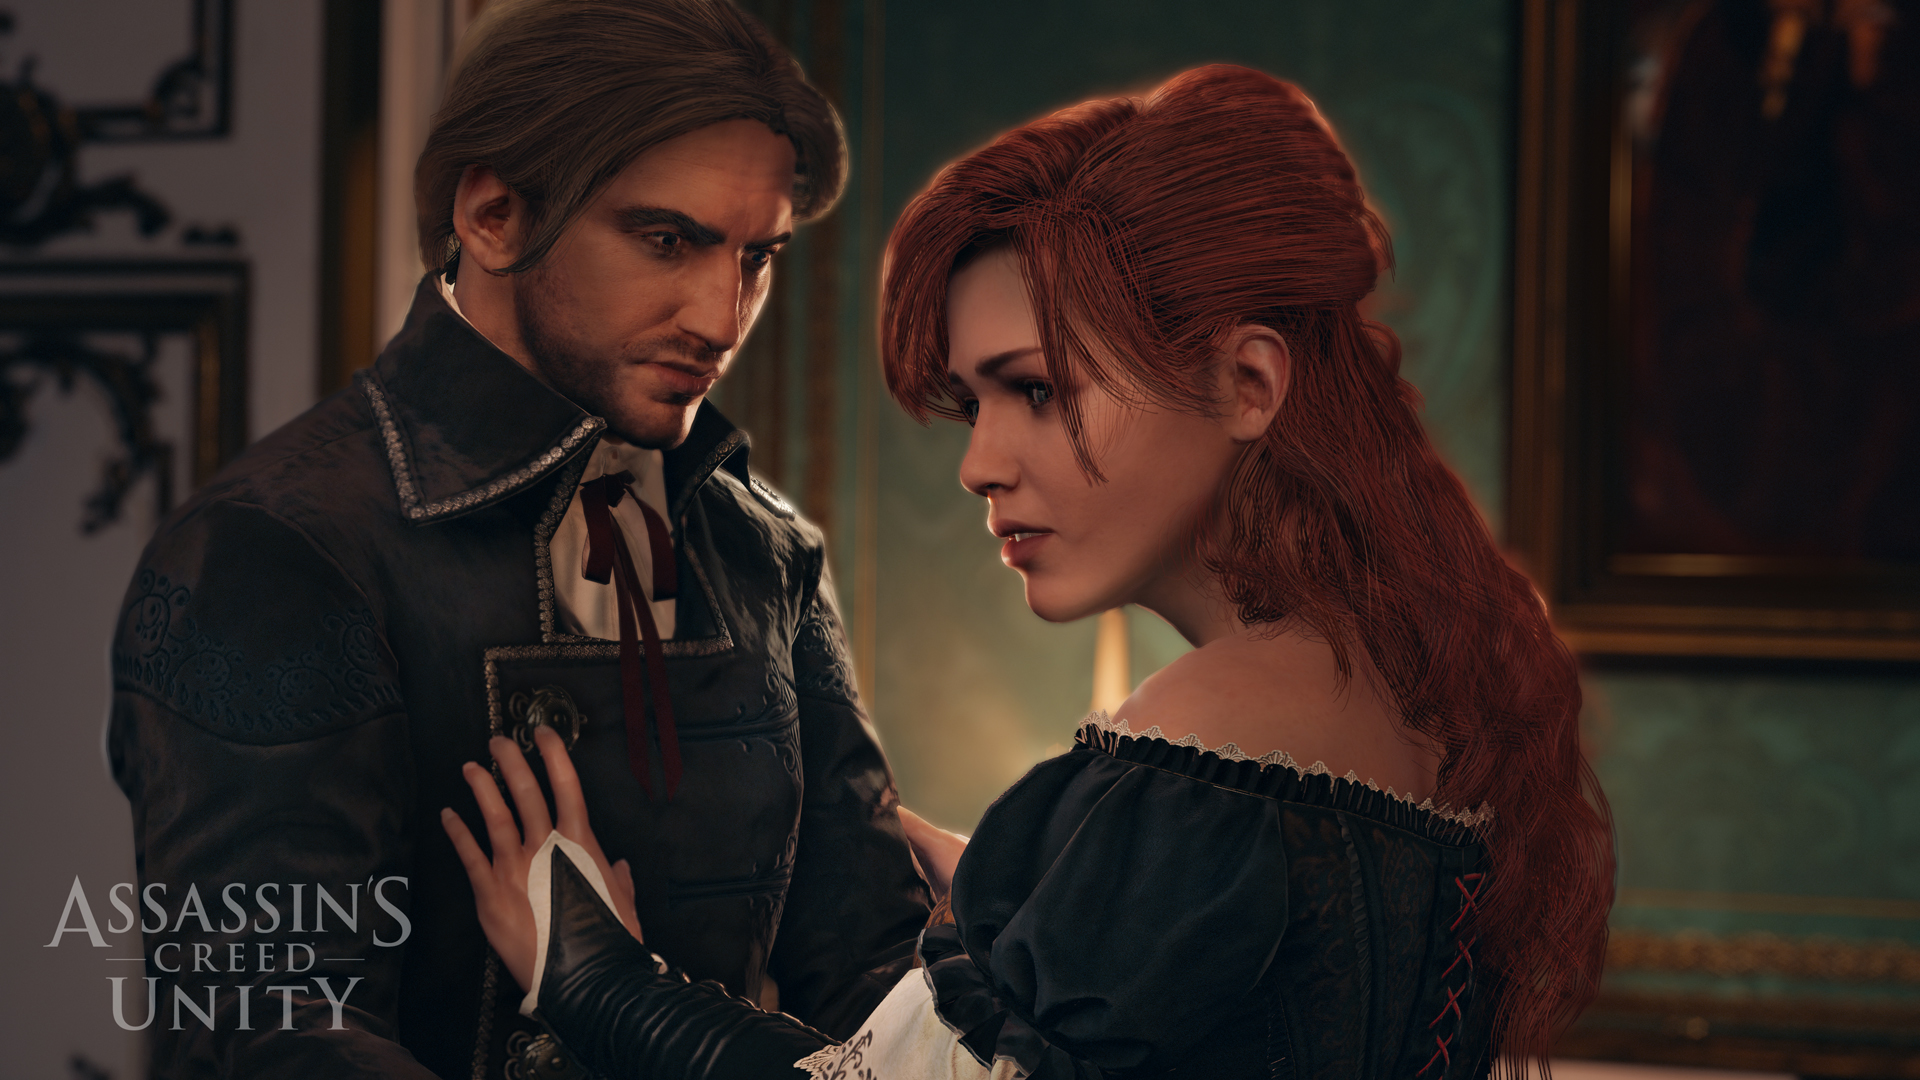 Assassin's Creed Unity Gallery #4